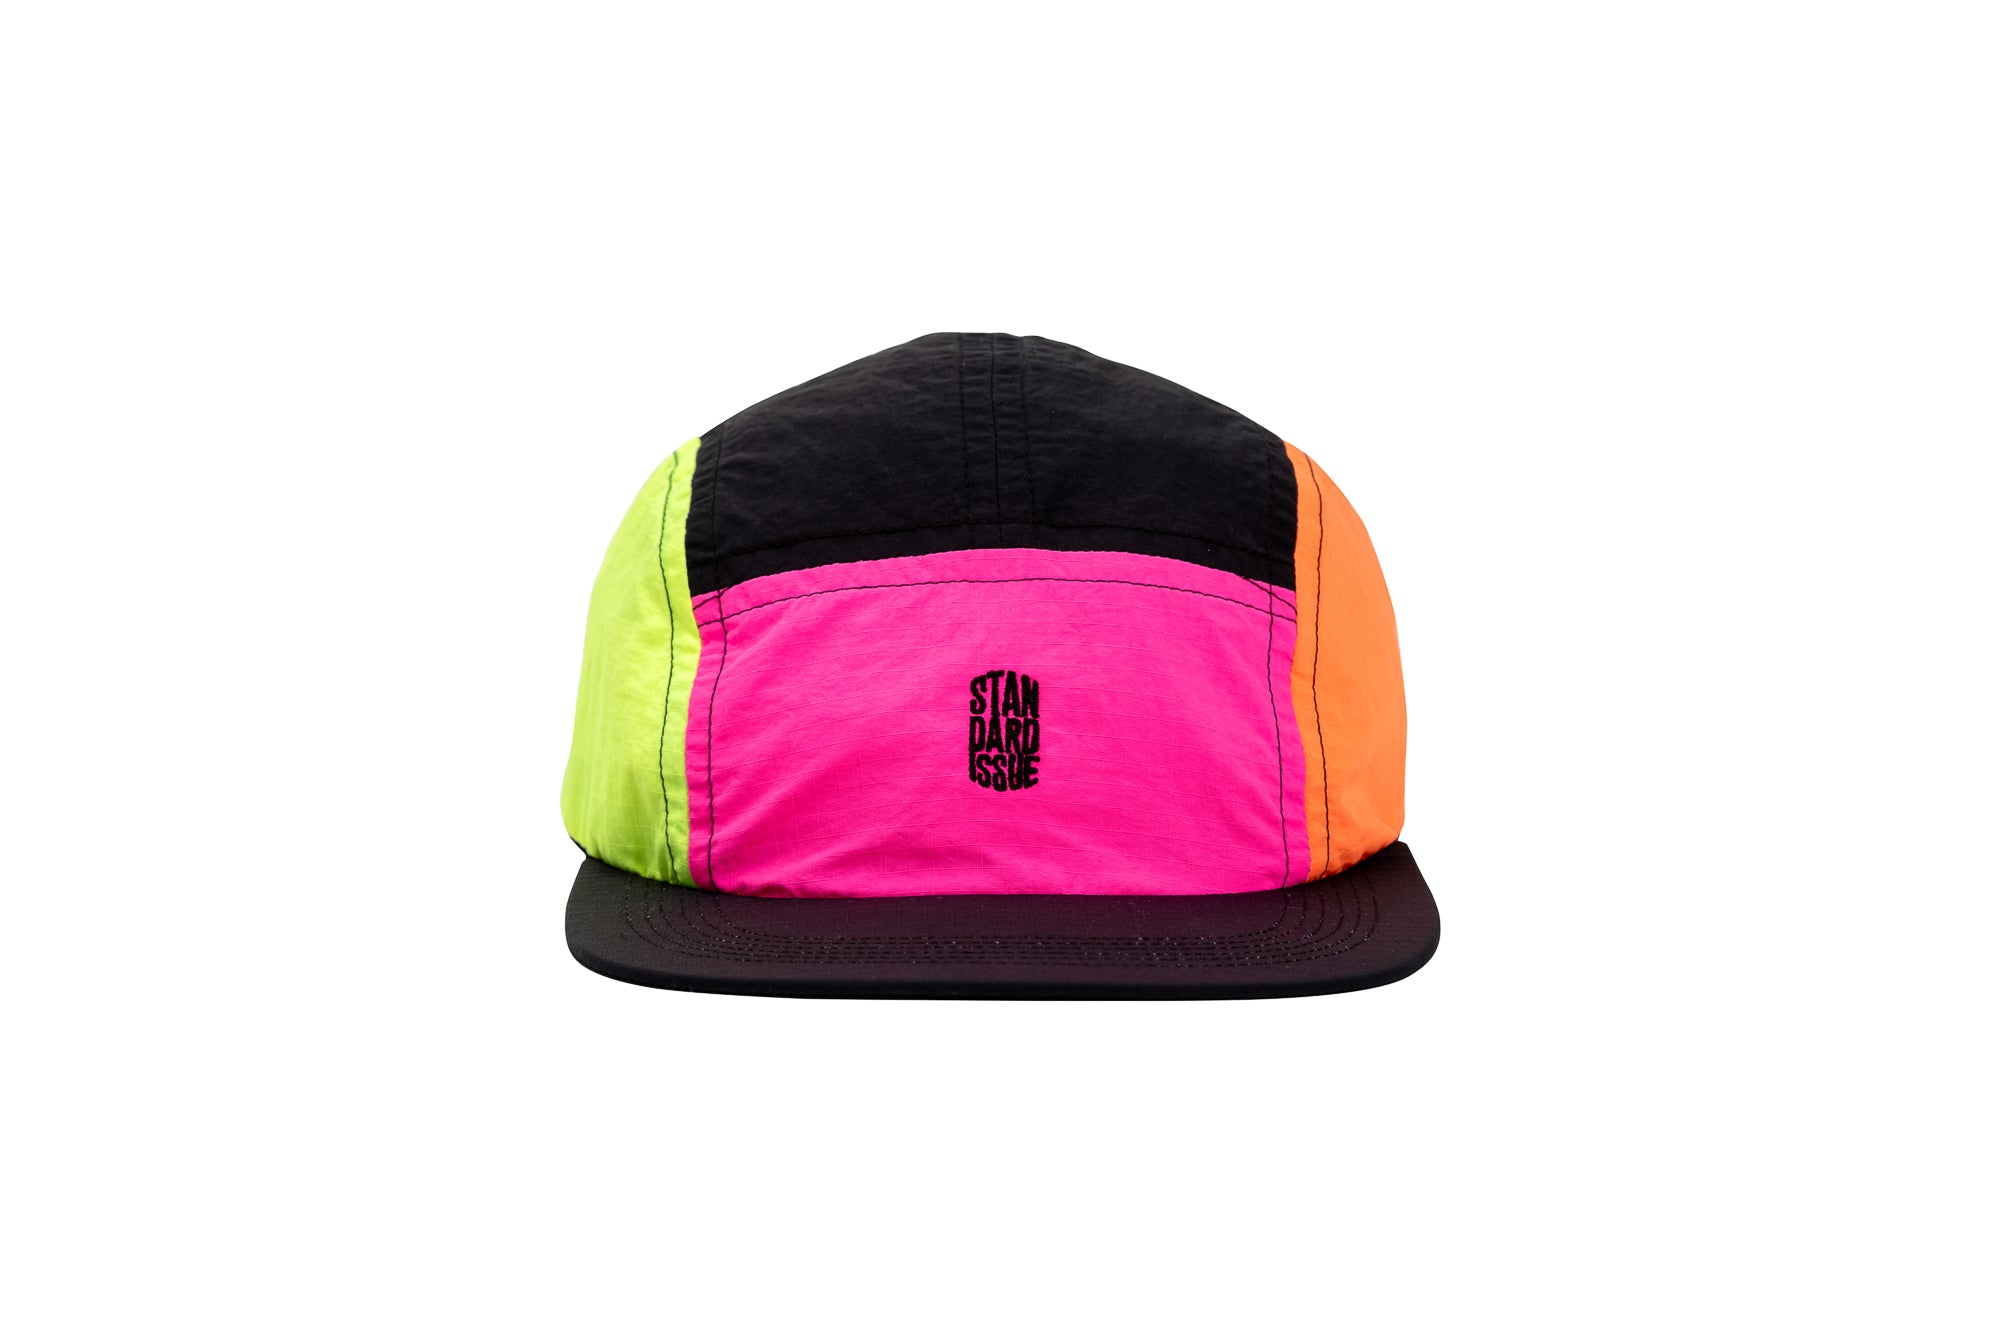 AT Multi Panel Camper Hat – STANDARD ISSUE TEES